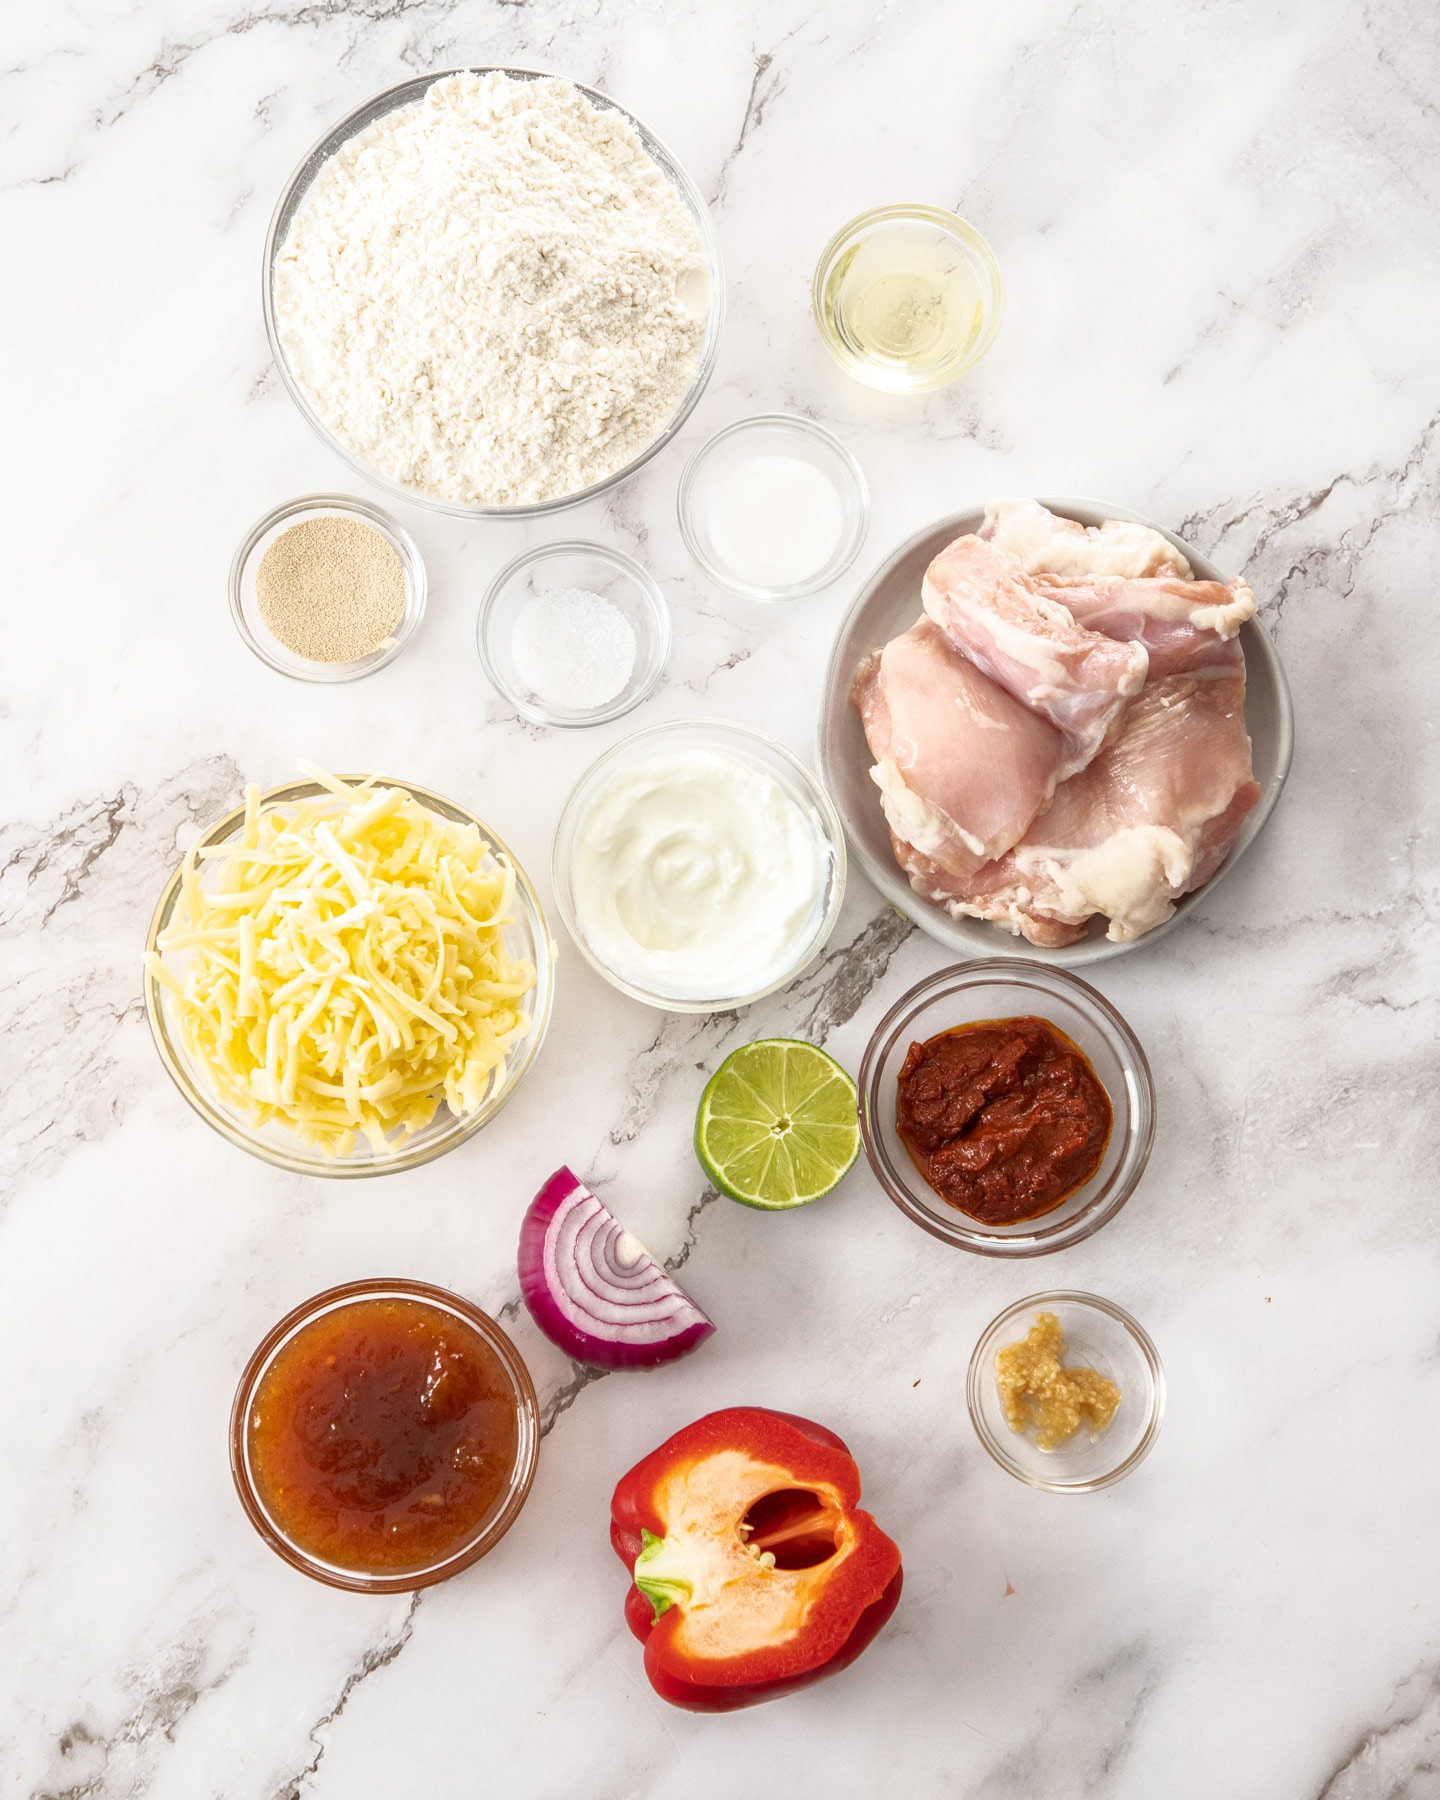 Ingredients for tandoori chicken pizza on a marble surface.